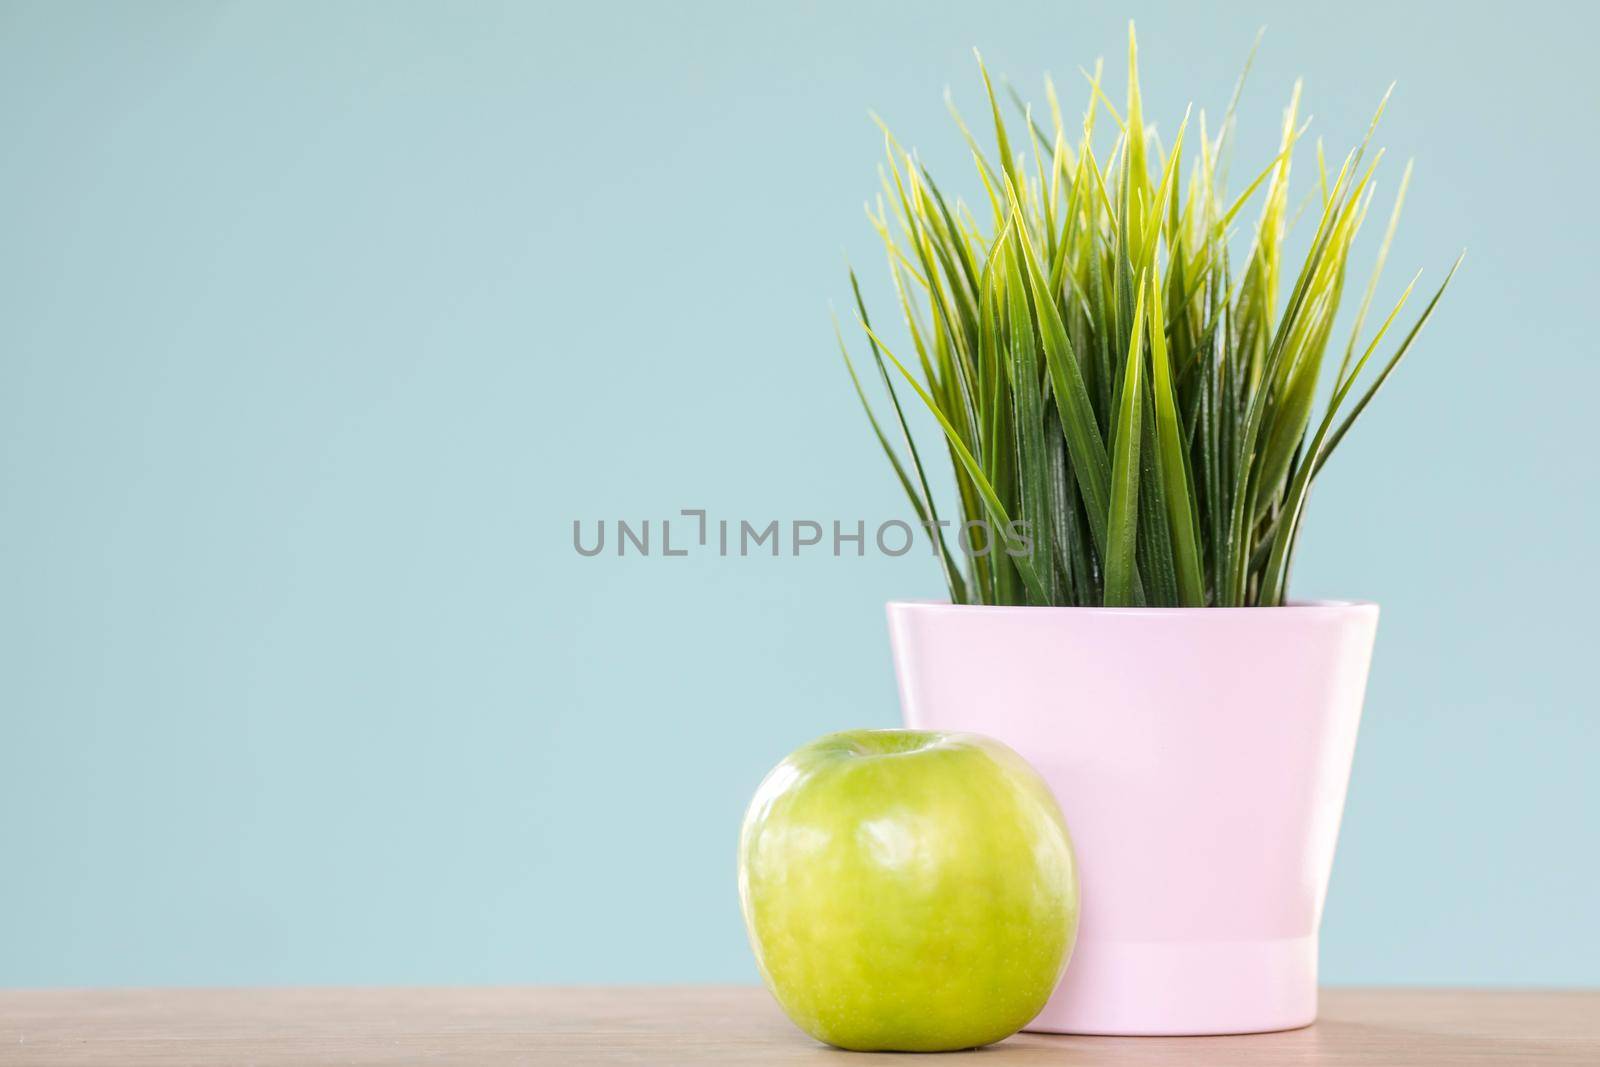 Delicious green apple lying on light blue background near ceramic pot with nice plant